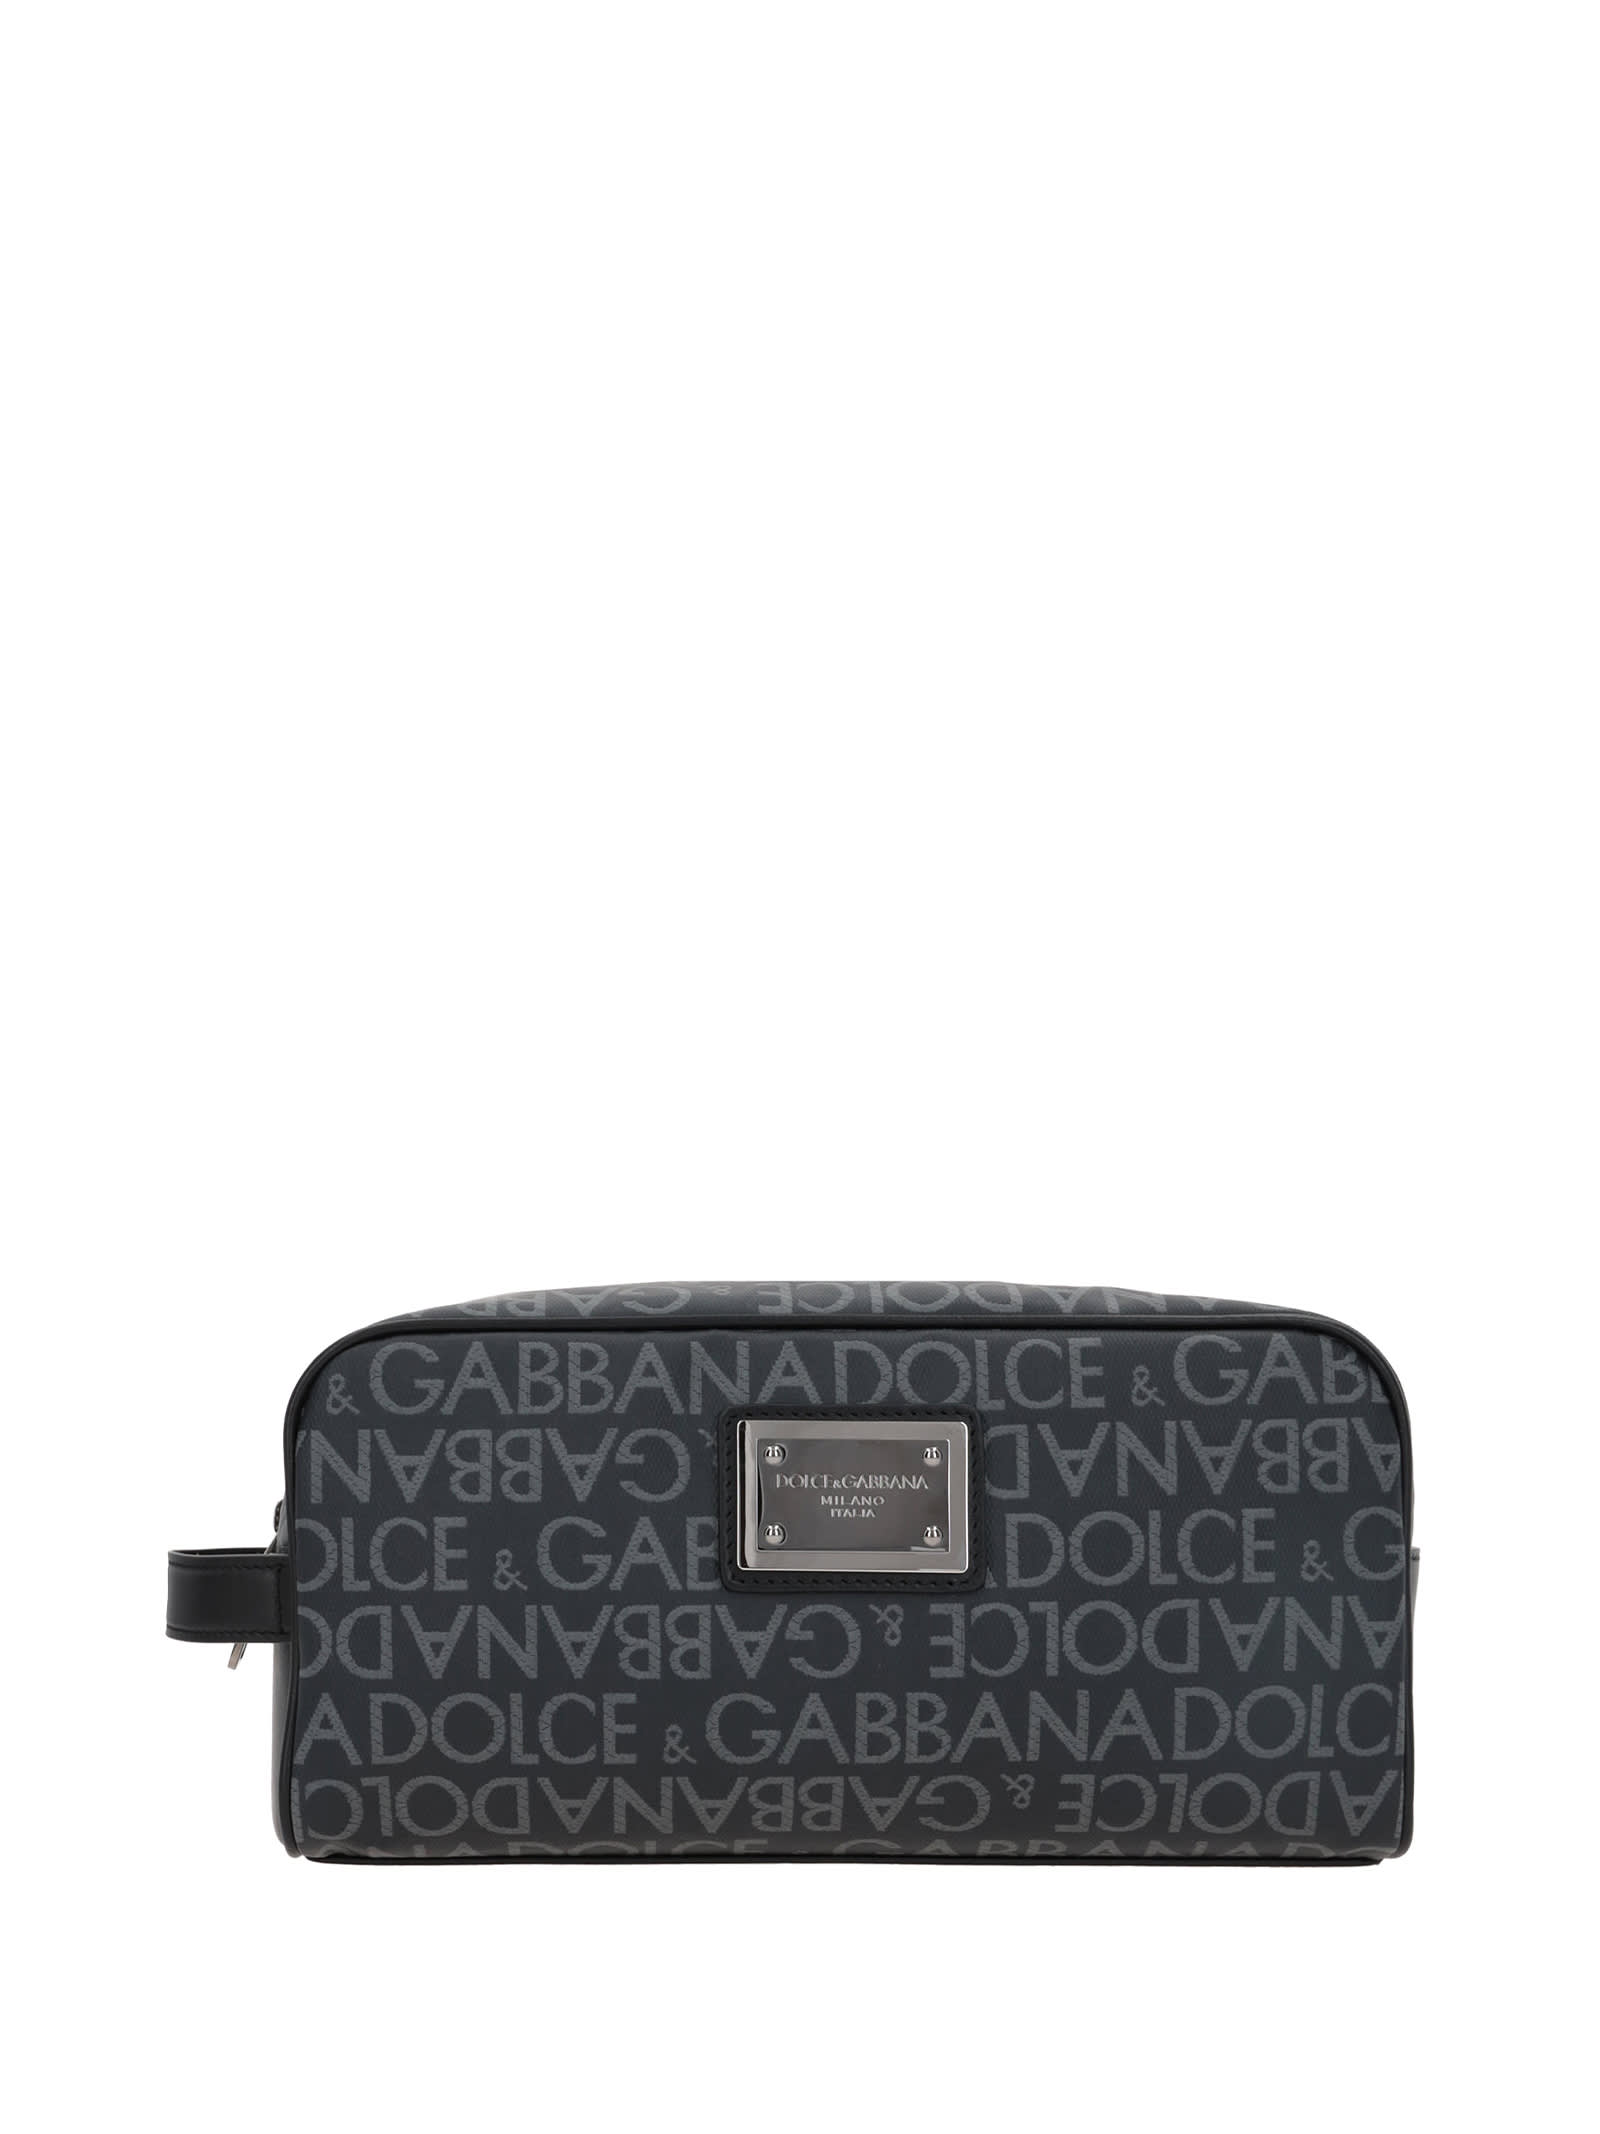 DOLCE & GABBANA TOILETRY BAG IN COATED JACQUARD